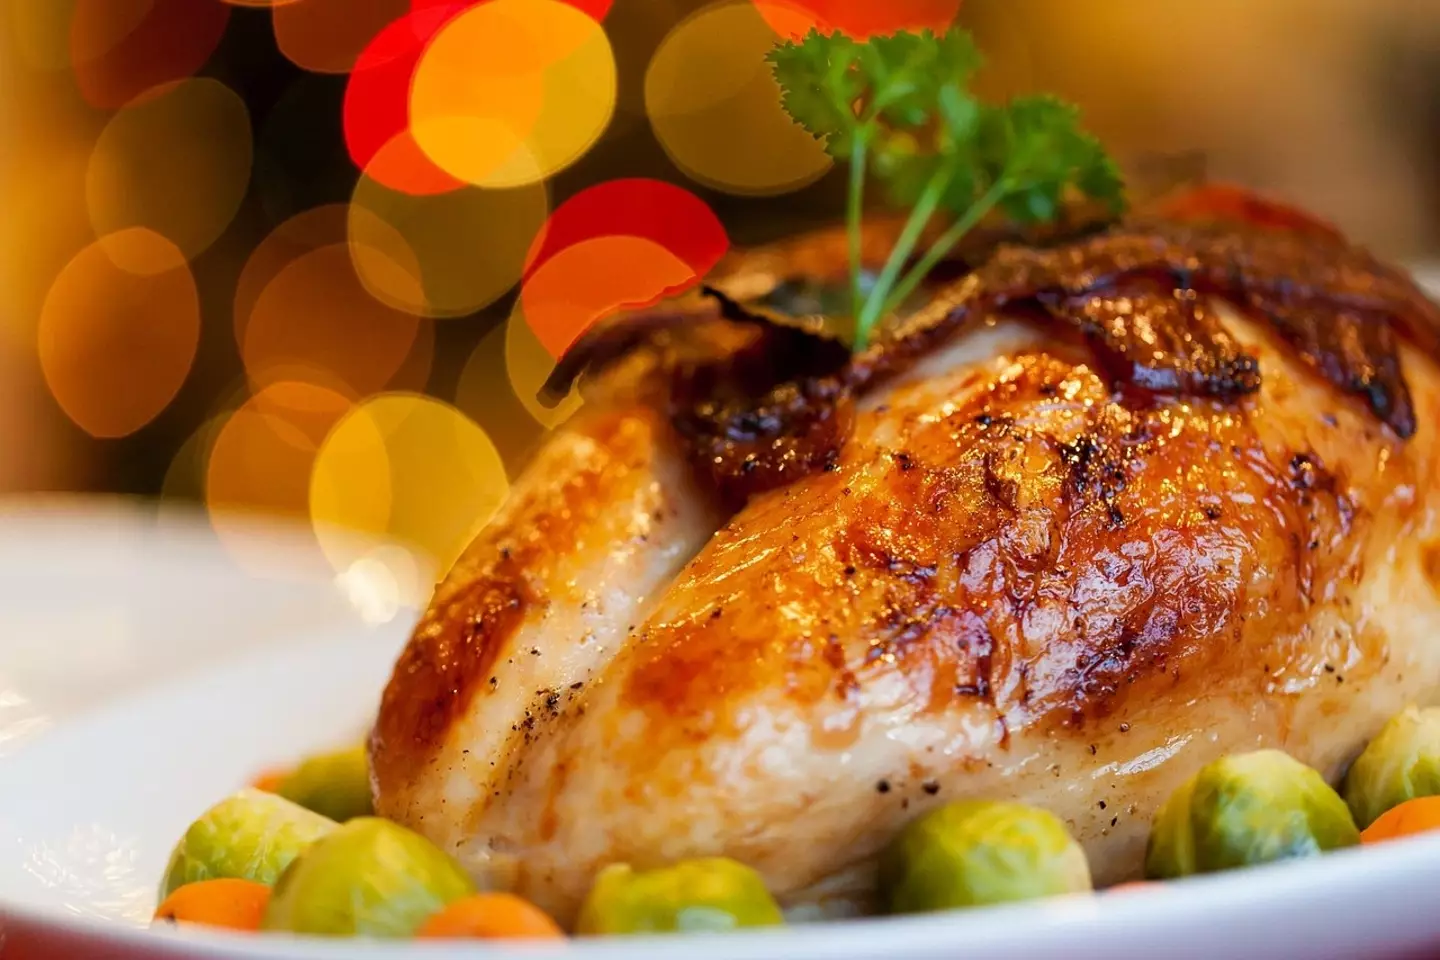 The price of the turkey sparked debate online.